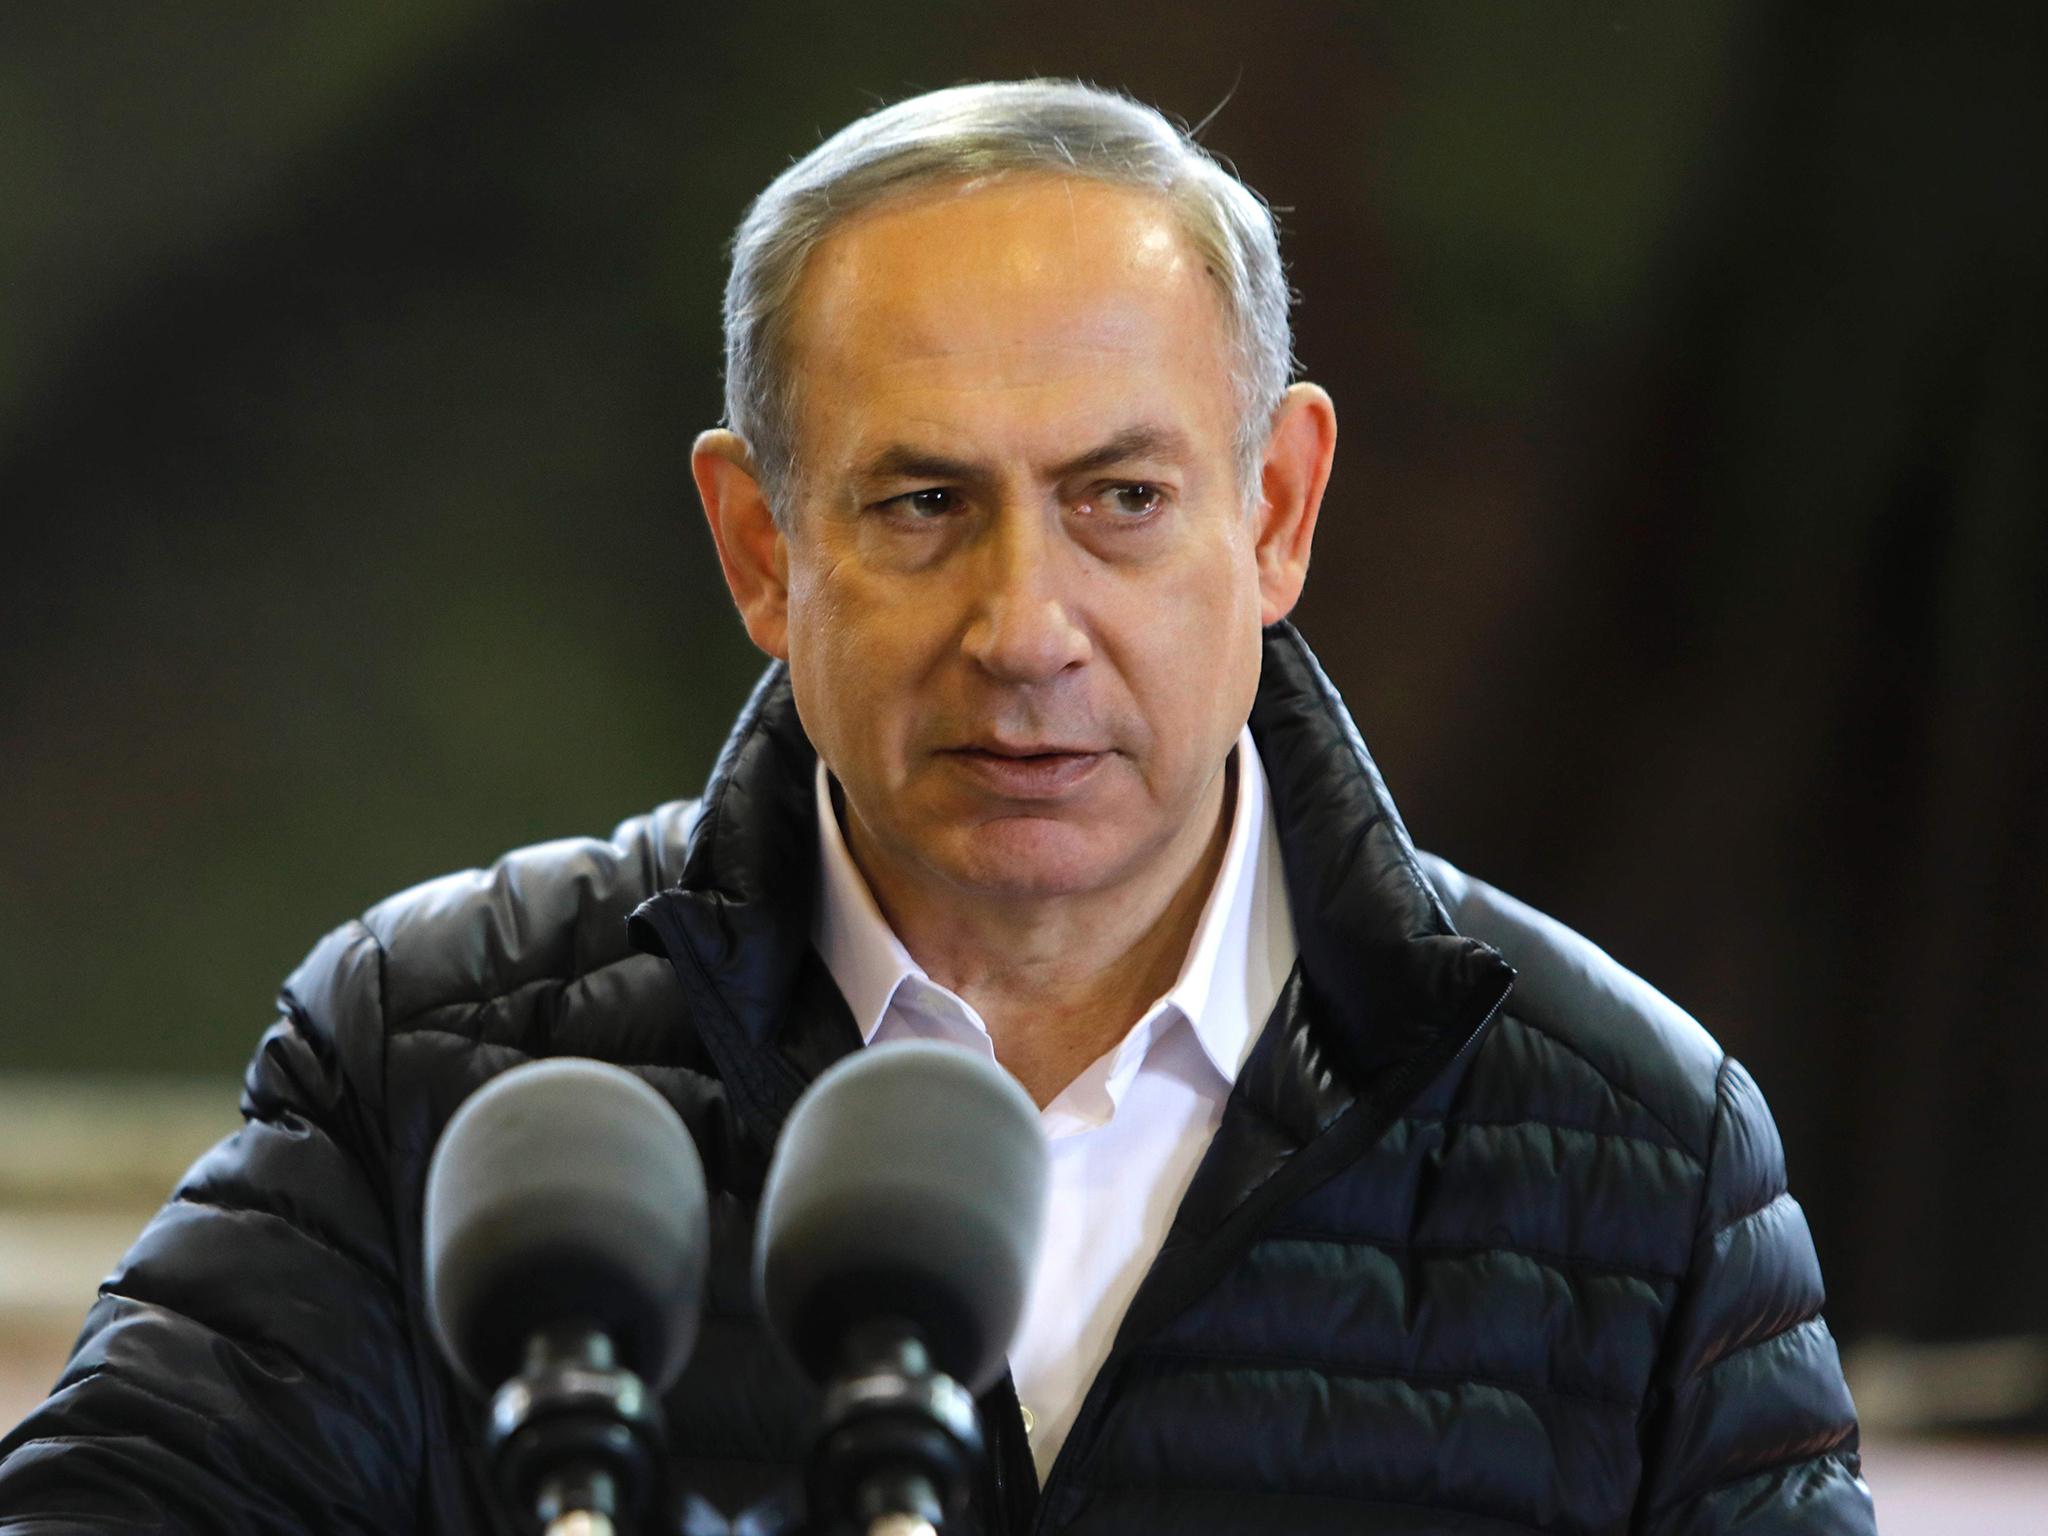 Netanyahu called the Paris peace conference 'the last twitches of the world of yesterday'